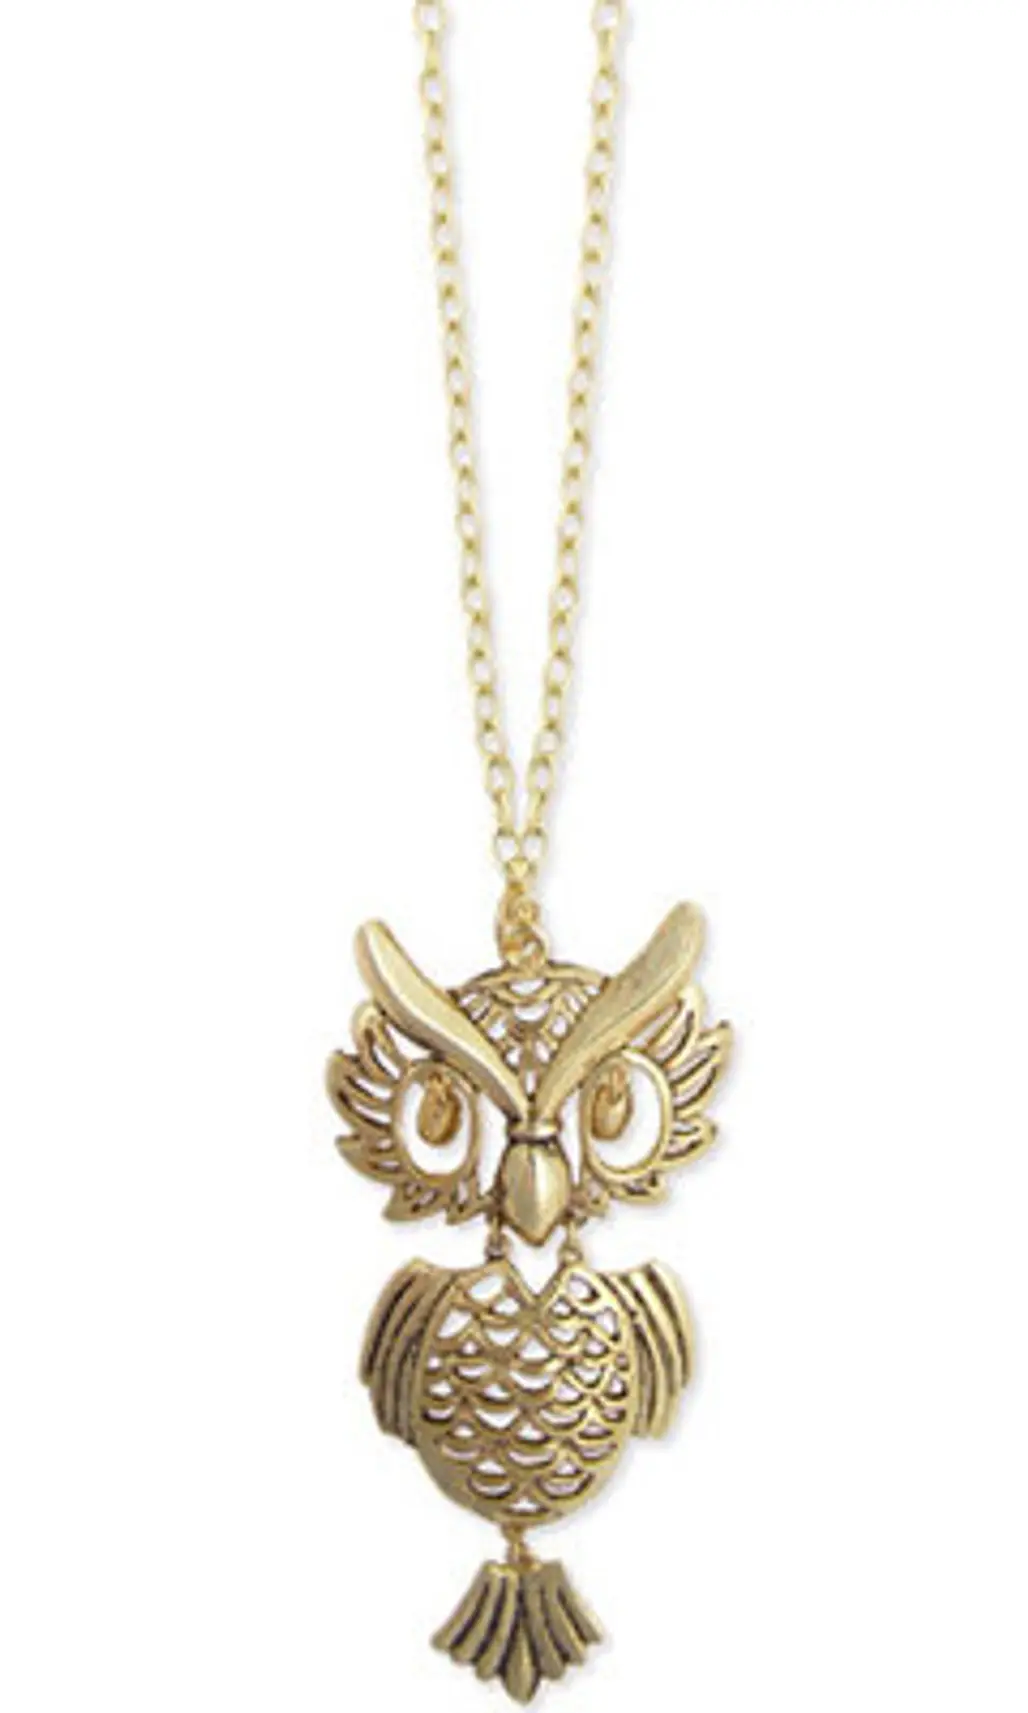 Gold but Wise Owl Vintage Necklace